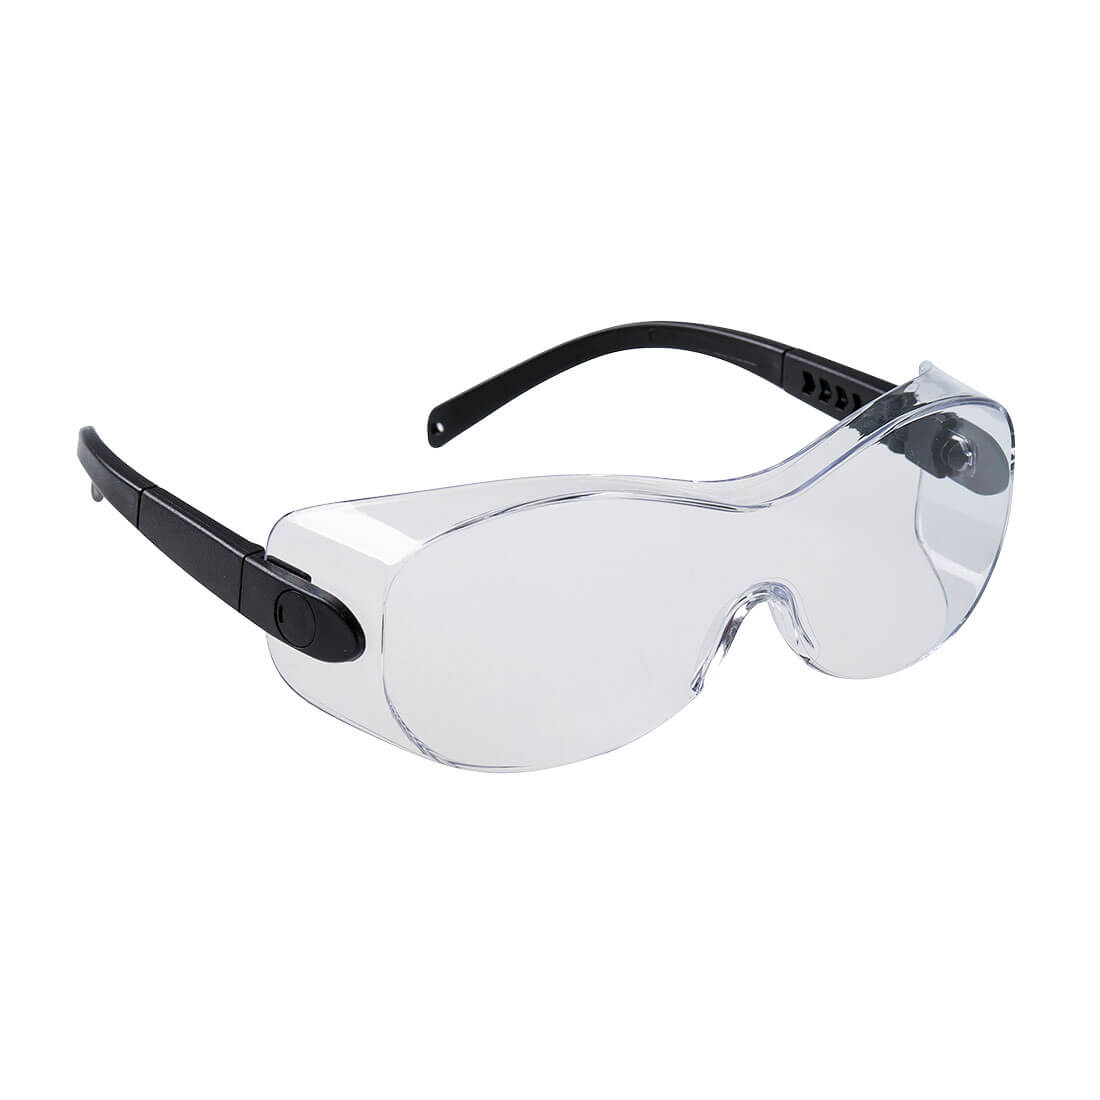 PS30 Over Spectacle Safety Anti Scratch UV + Eye protection Eyewear Glasses - Hamtons Direct